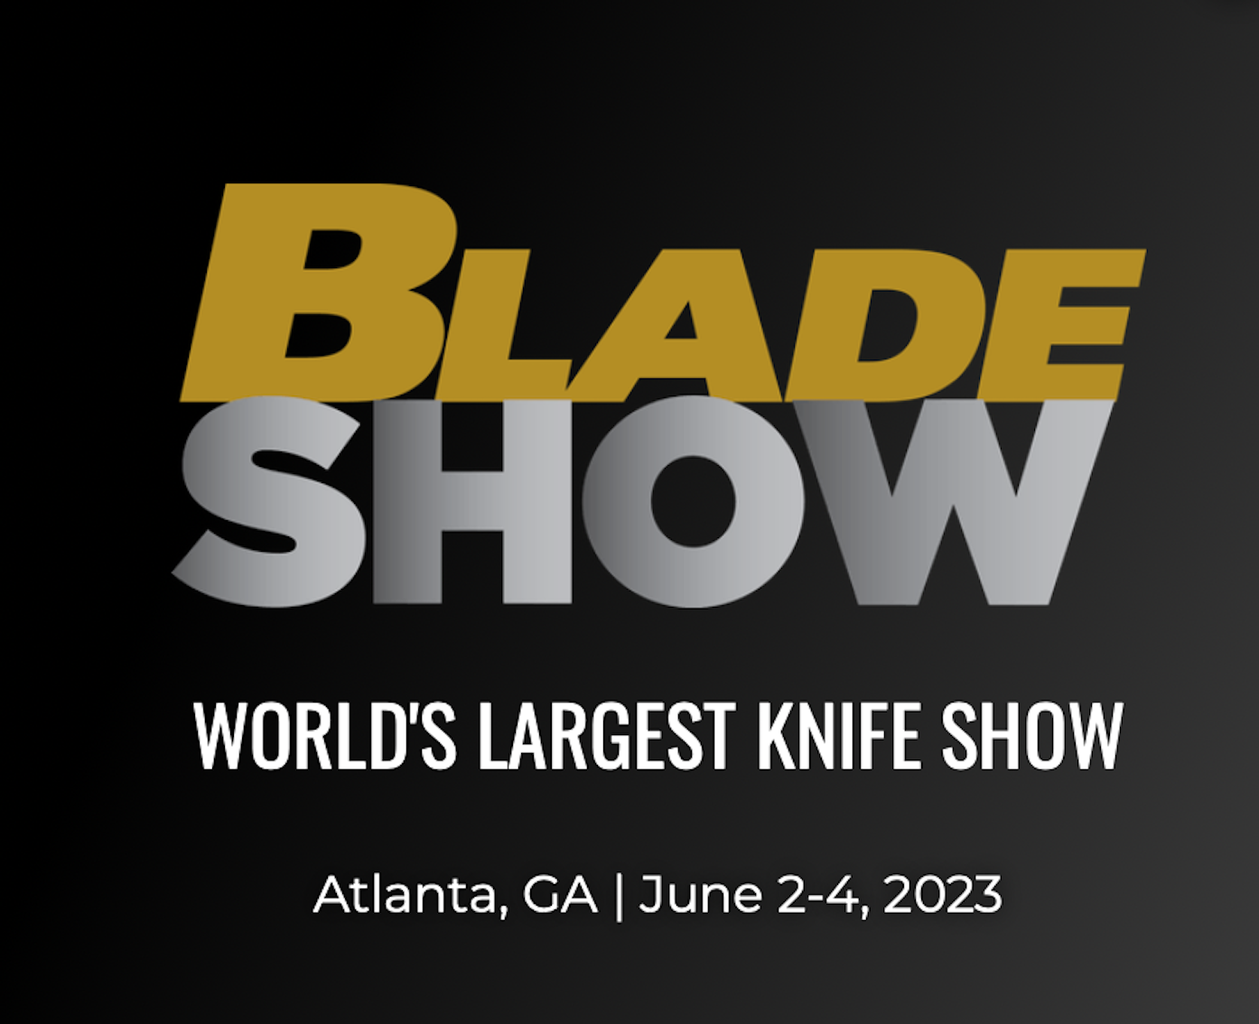 The blade show 2023 - 2 - 4 June 2023